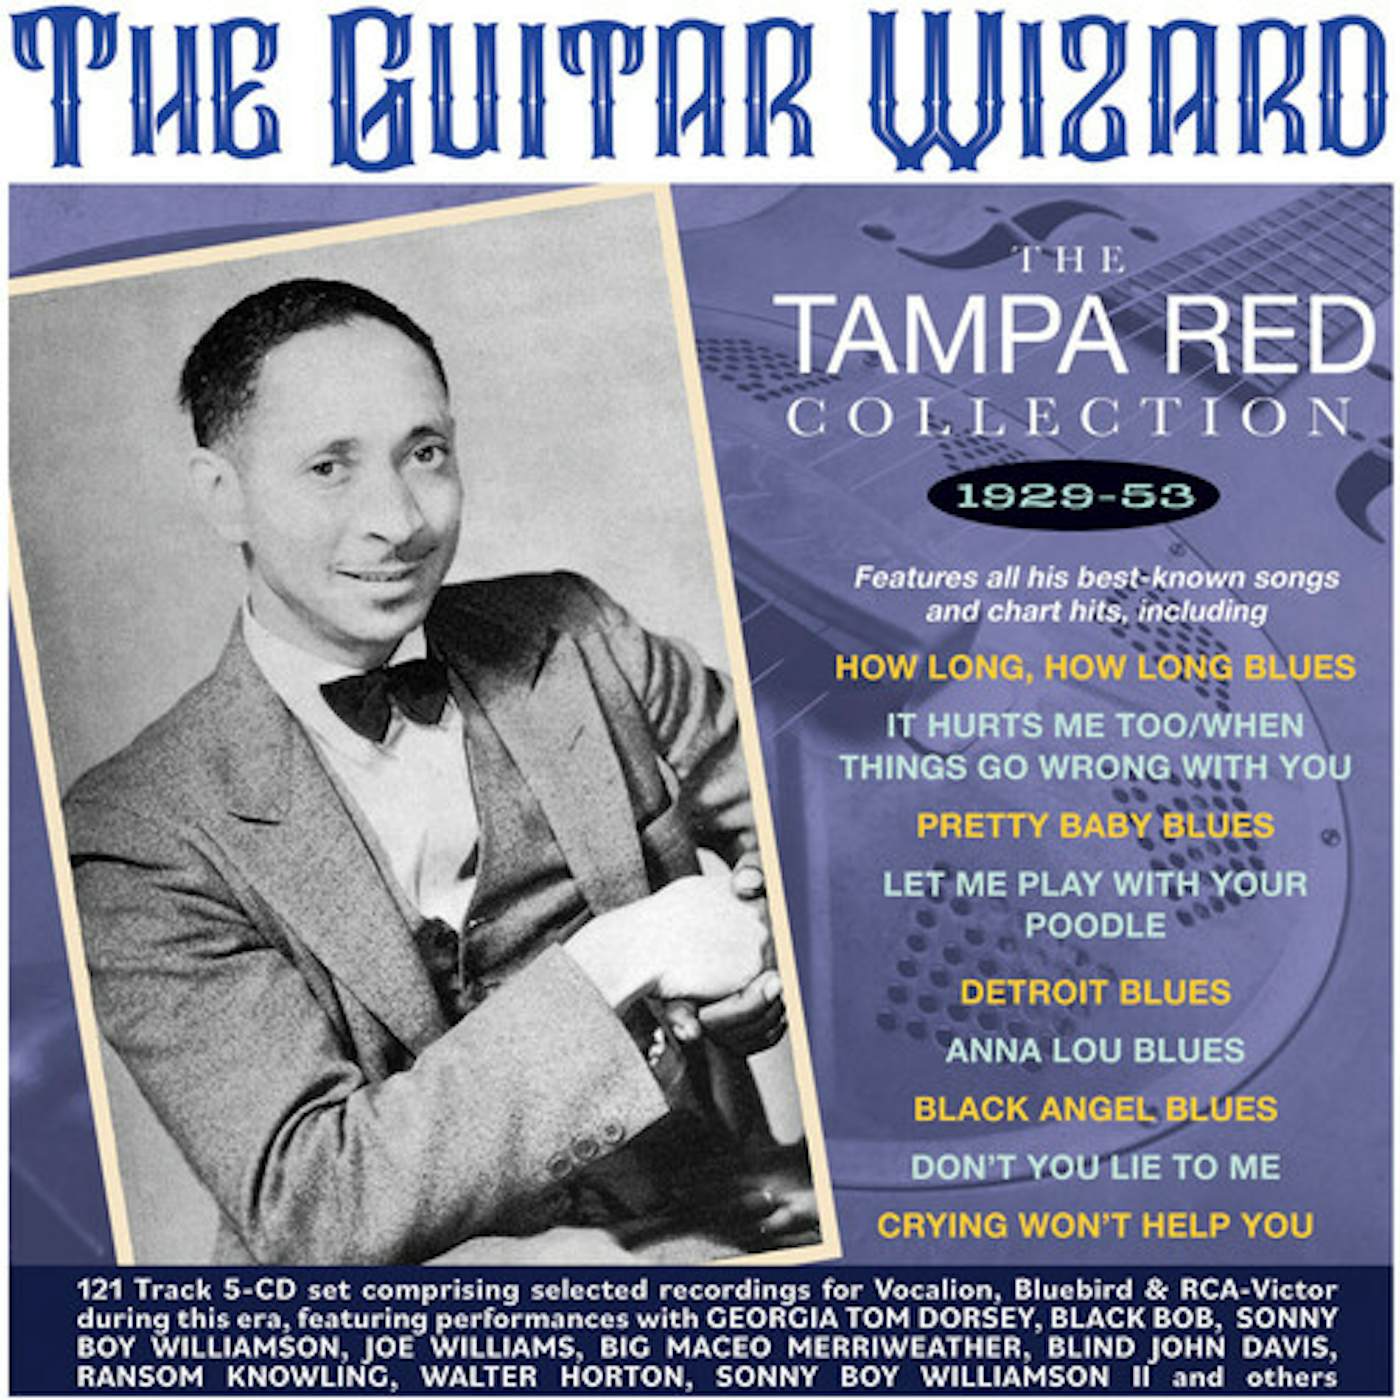 GUITAR WIZARD: THE TAMPA RED COLLECTION 1929-53 CD